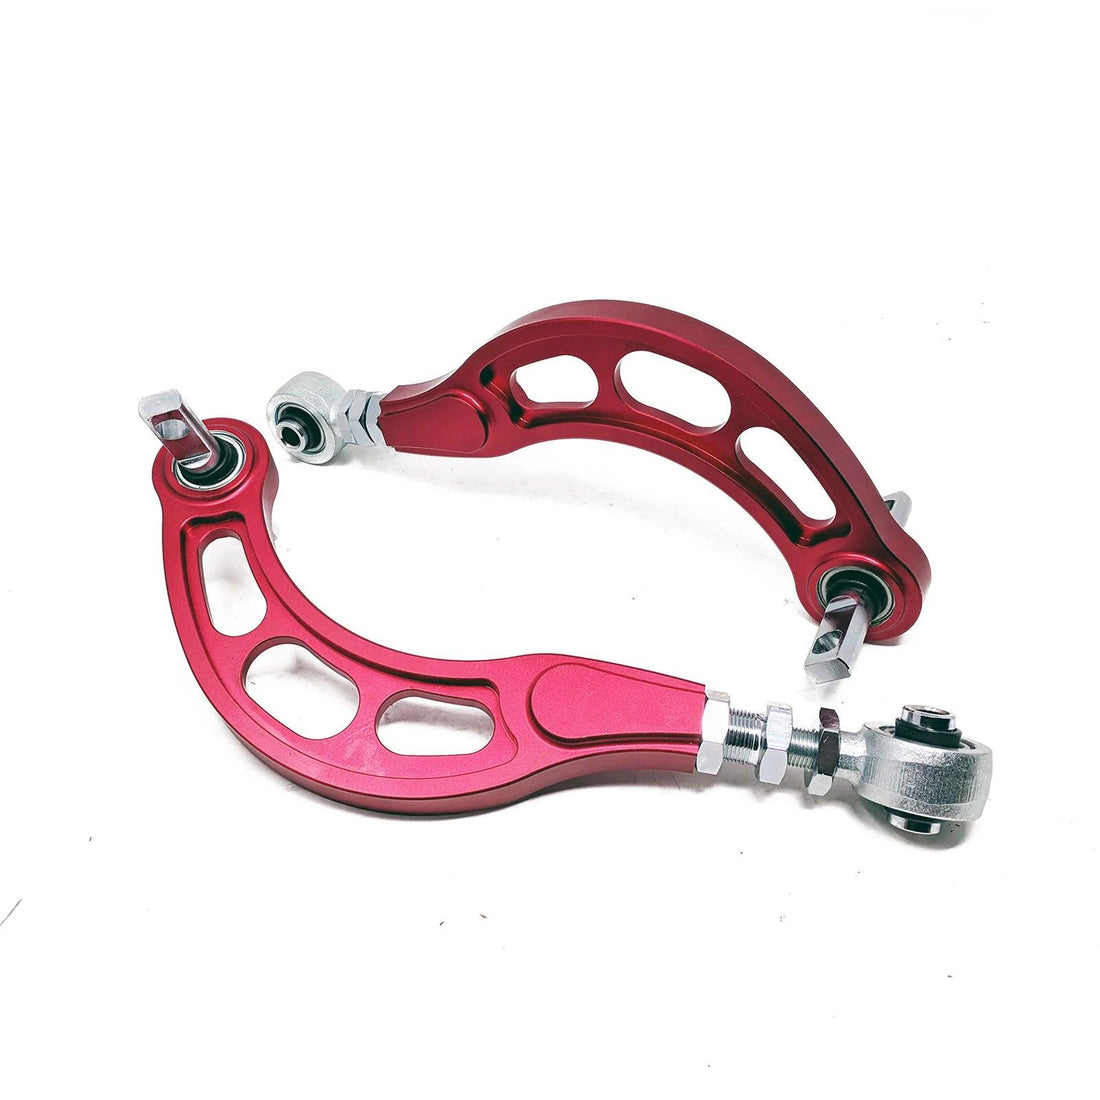 Godspeed Project Rear Adjustable Spherical Camber Arms (2006-2015 Civic) - Saikospeed